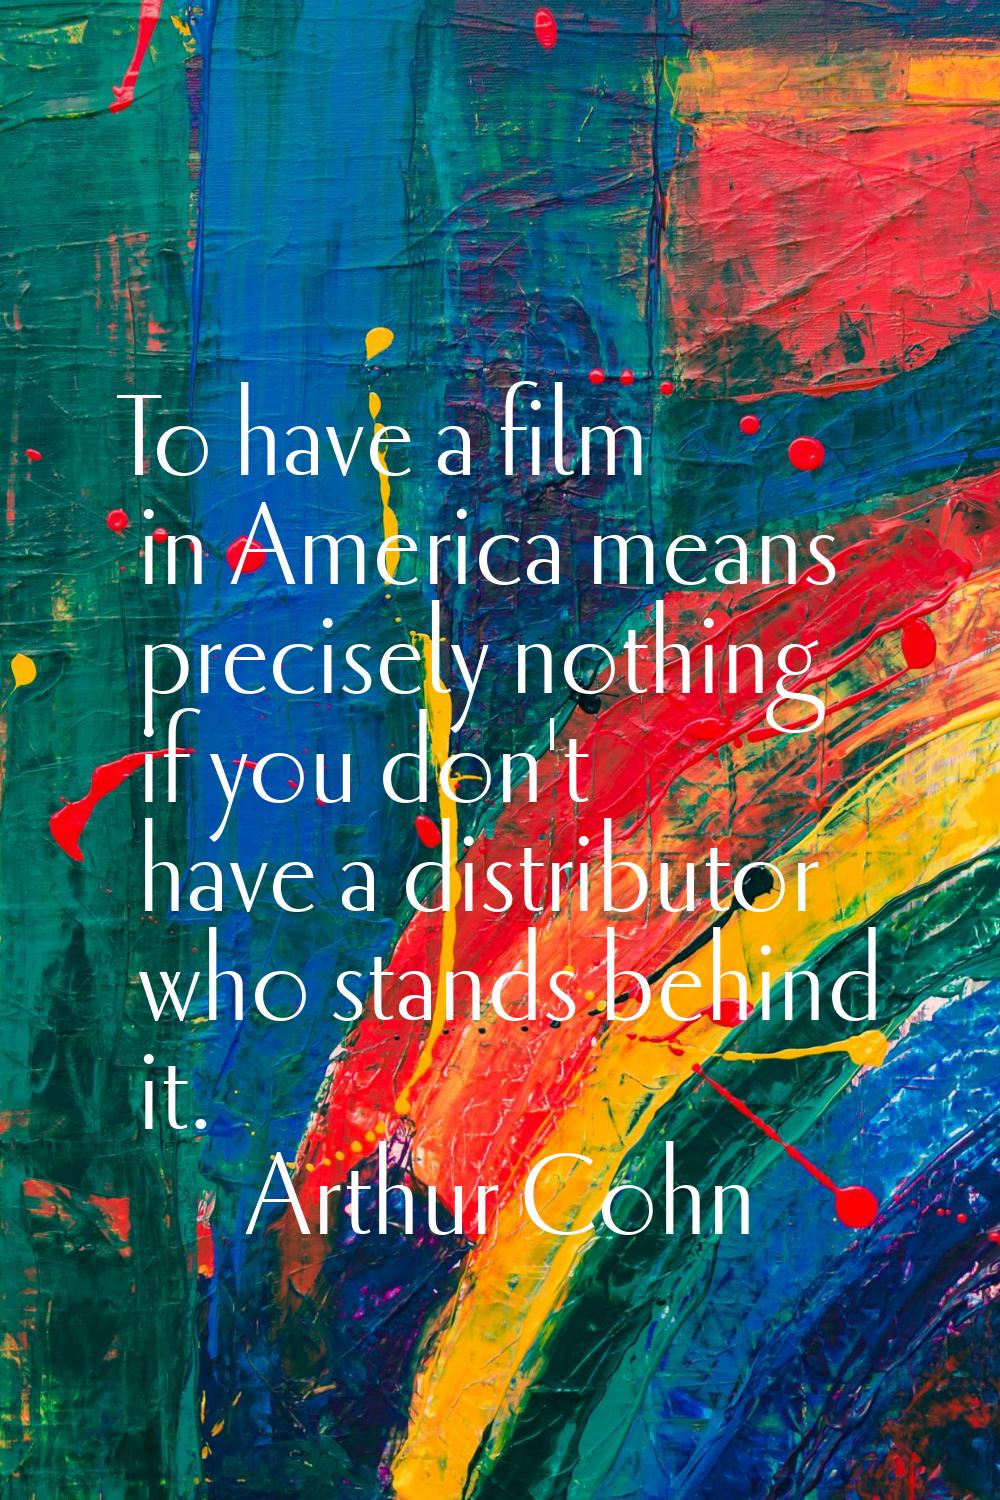 To have a film in America means precisely nothing if you don't have a distributor who stands behind